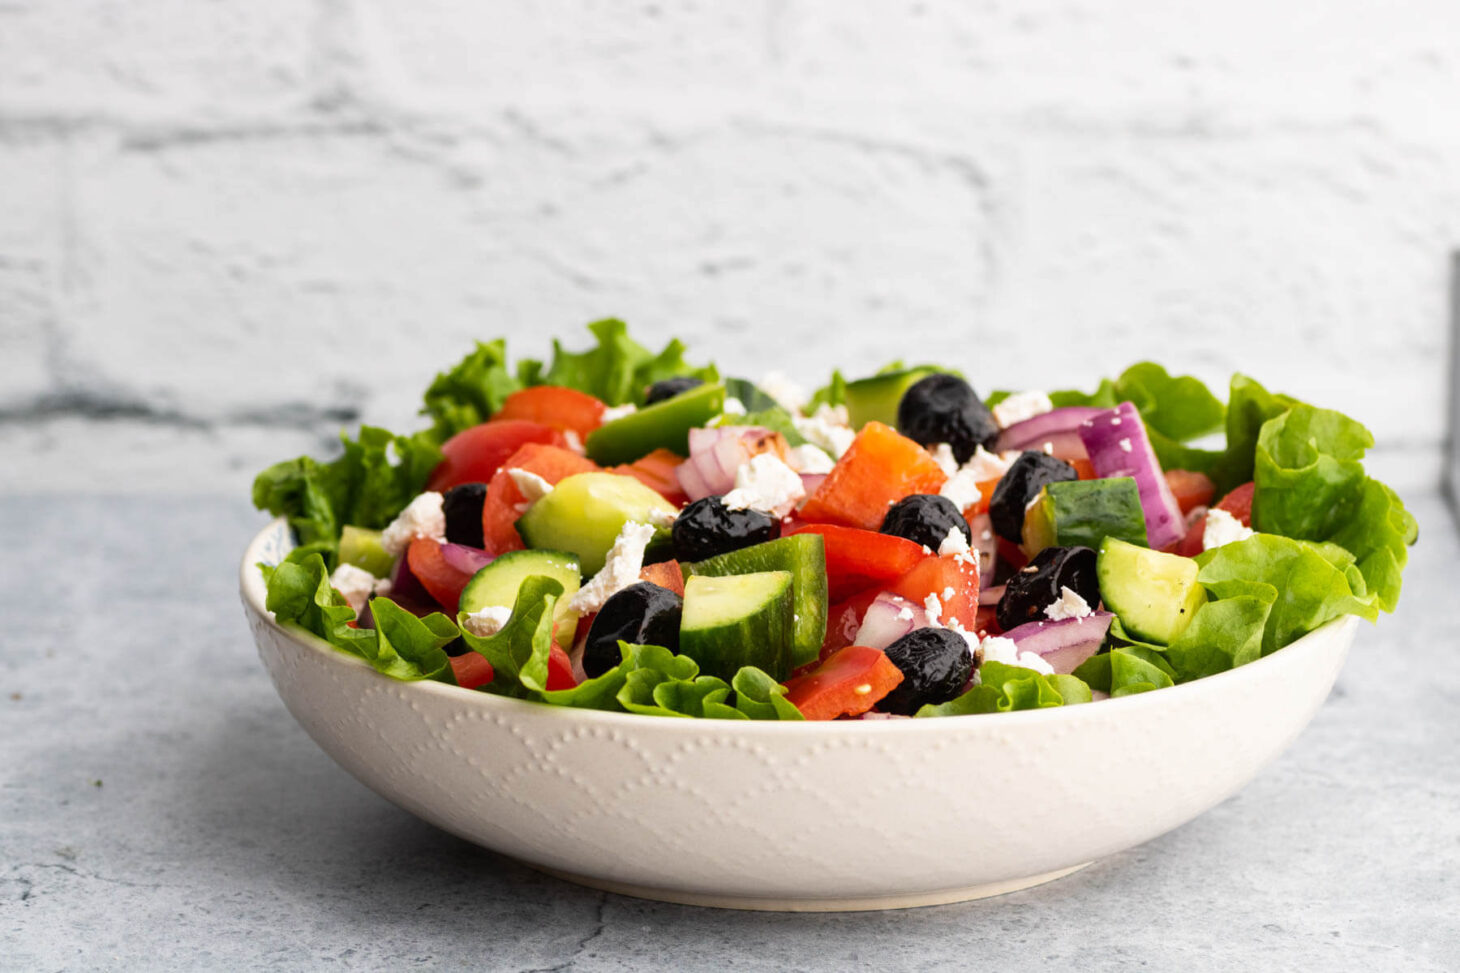 A white bowl filled with chopped tomatoes, peppers, red onions, cucumbers, black olives, and feta cheese.